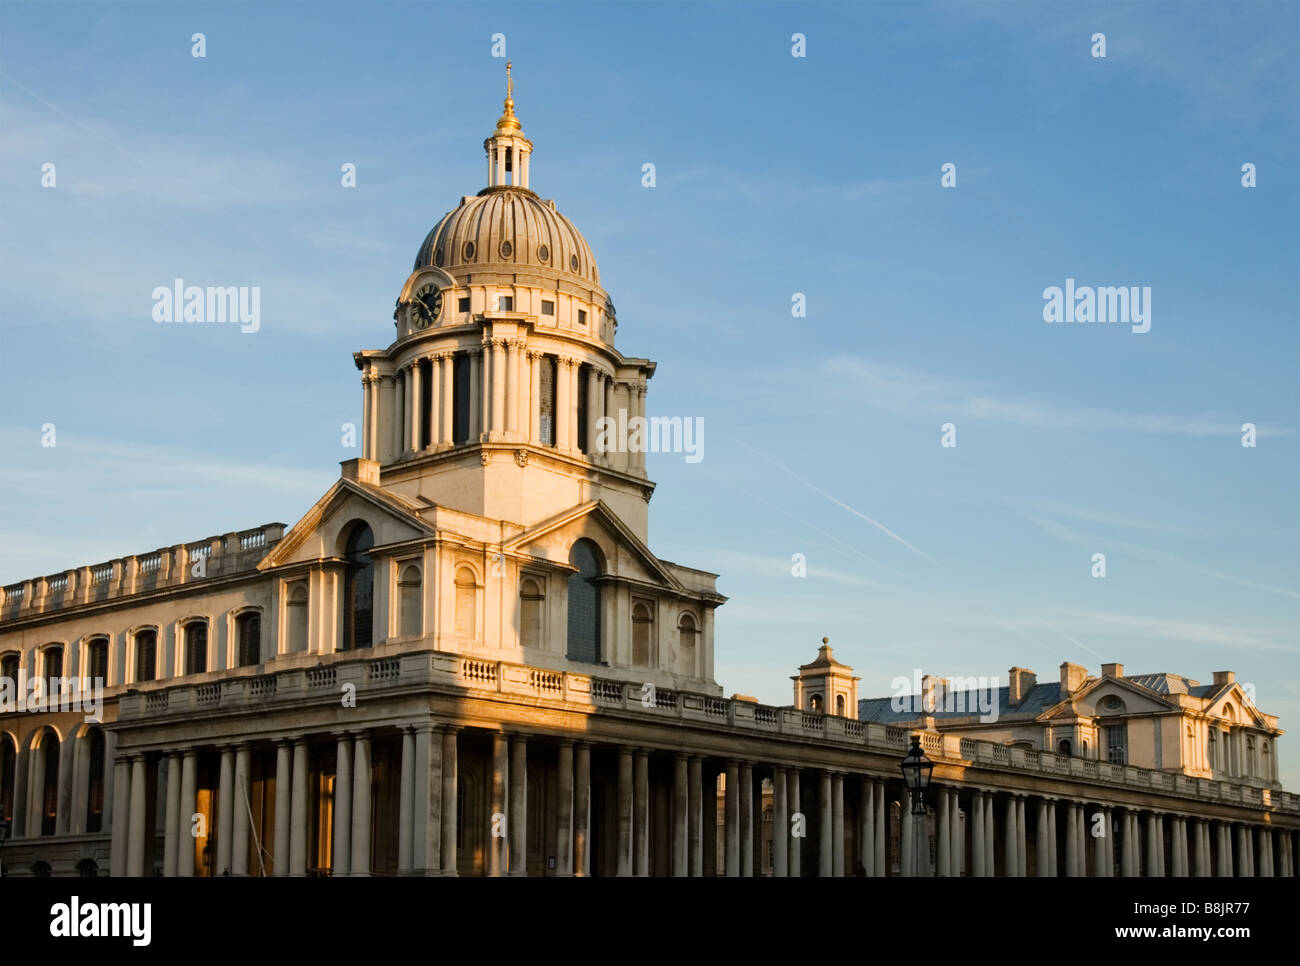 The Old Royal Naval College, The Chapel of St Peter and St Paul in Queen Mary Court, Greenwich London England UK Stock Photo